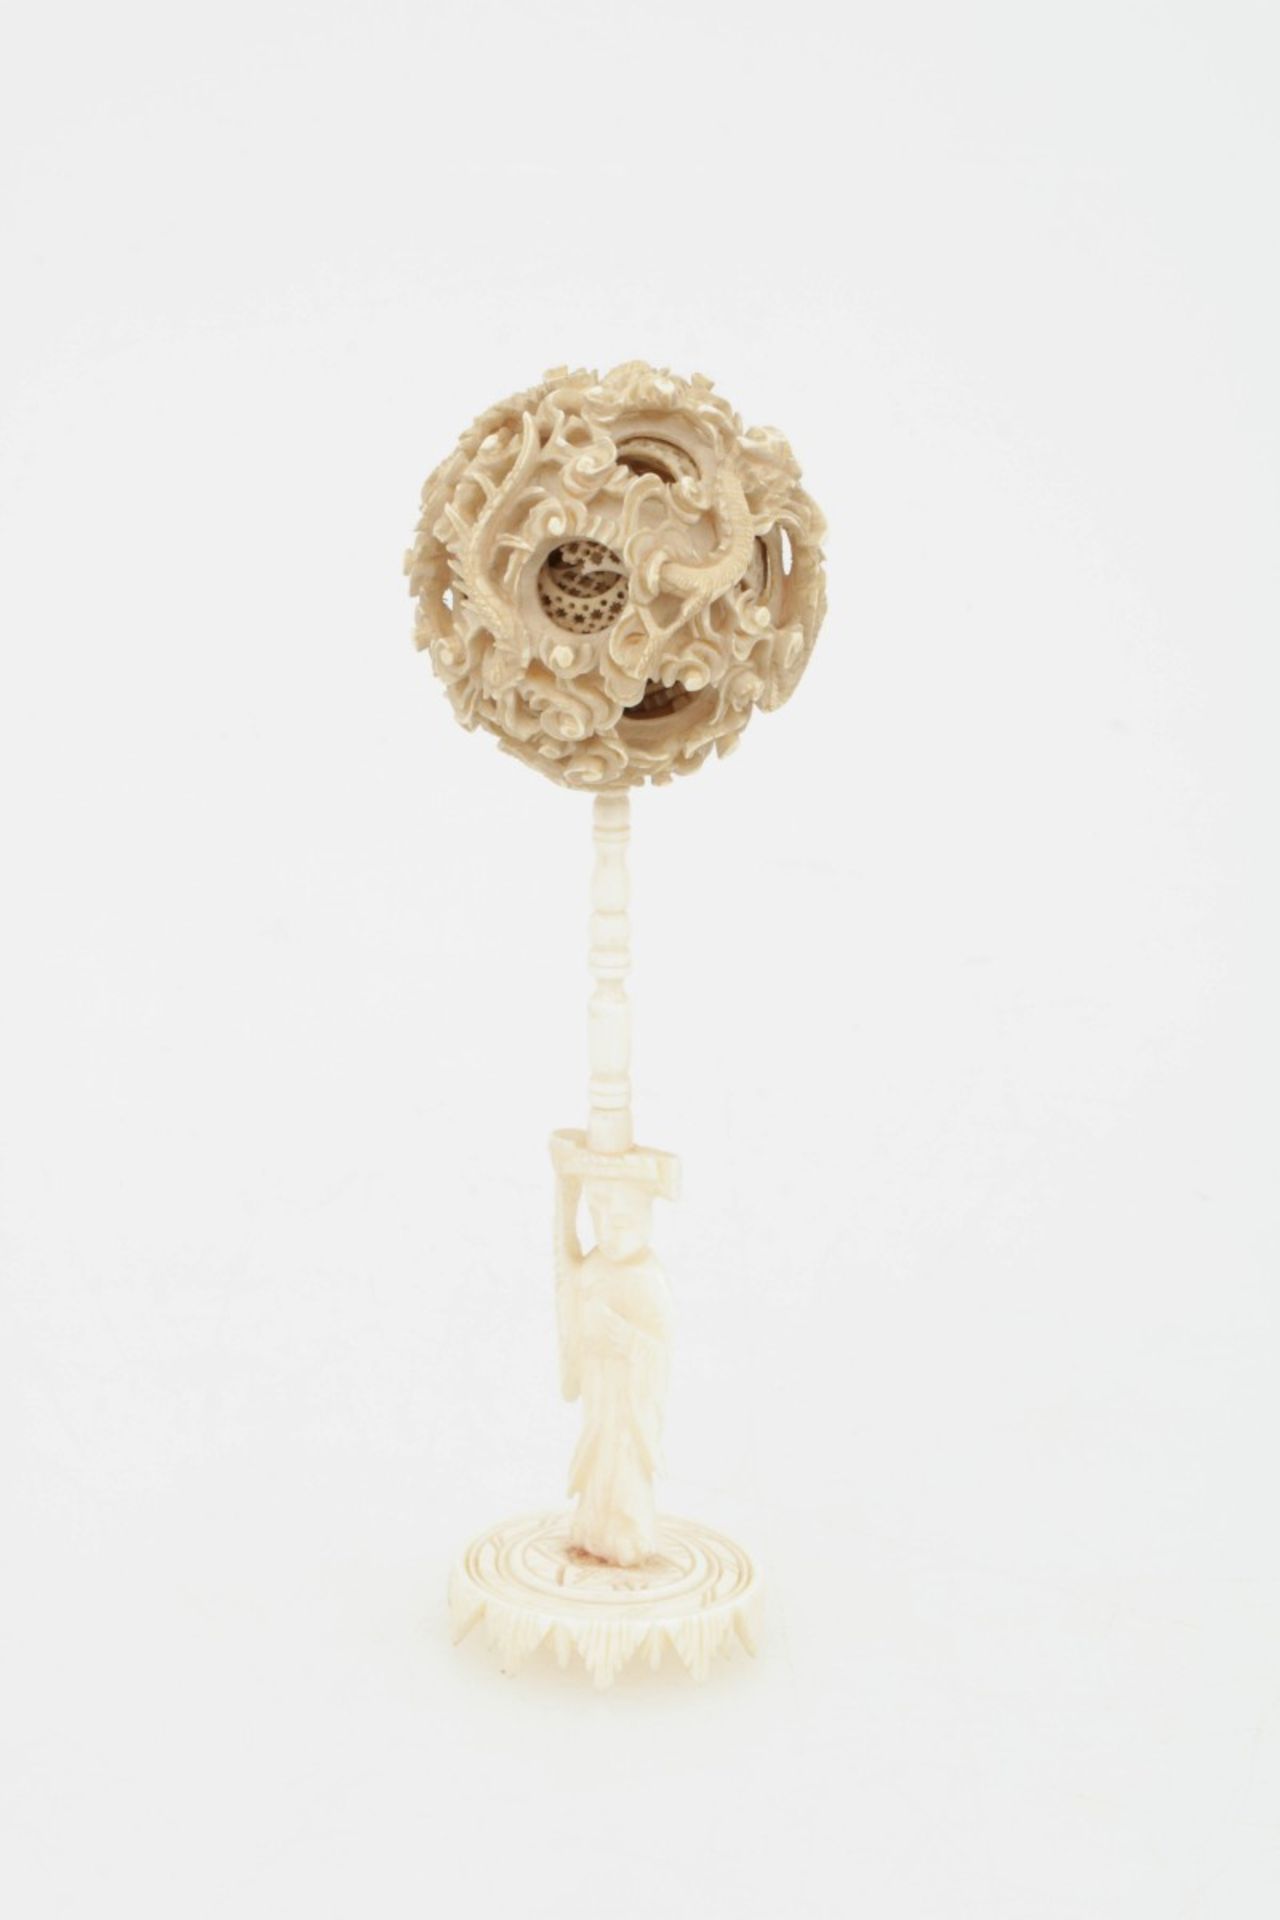 An ivory puzzle ball, China, late 19th century.